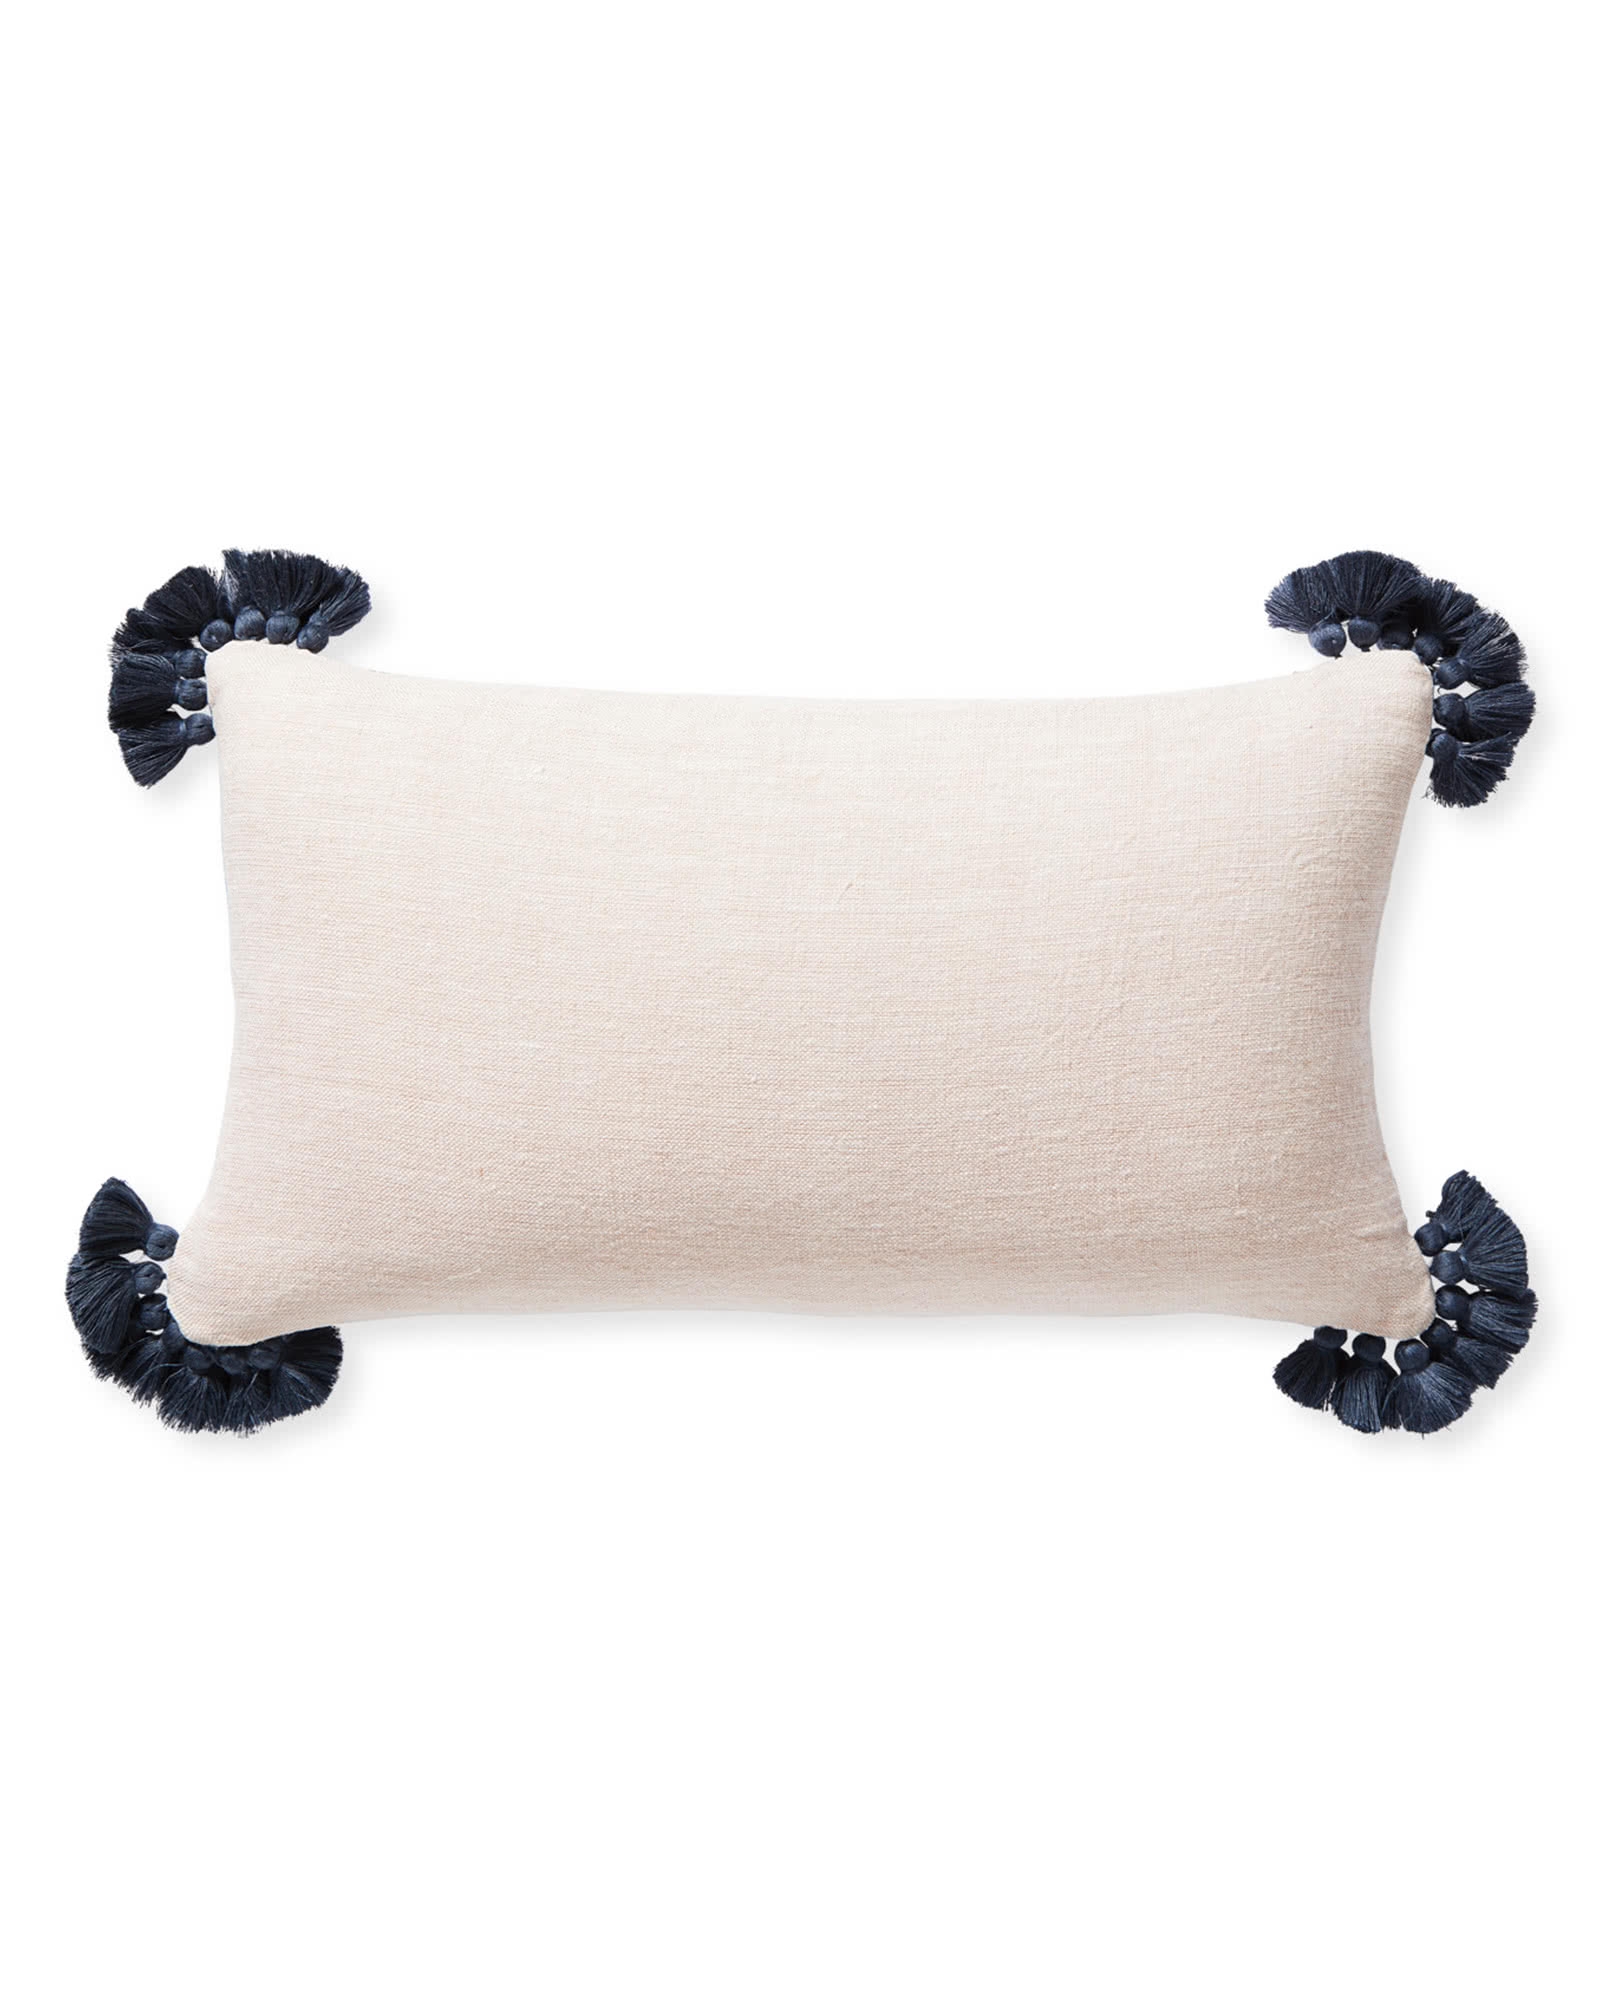 Cayucos Pillow Cover - Image 1